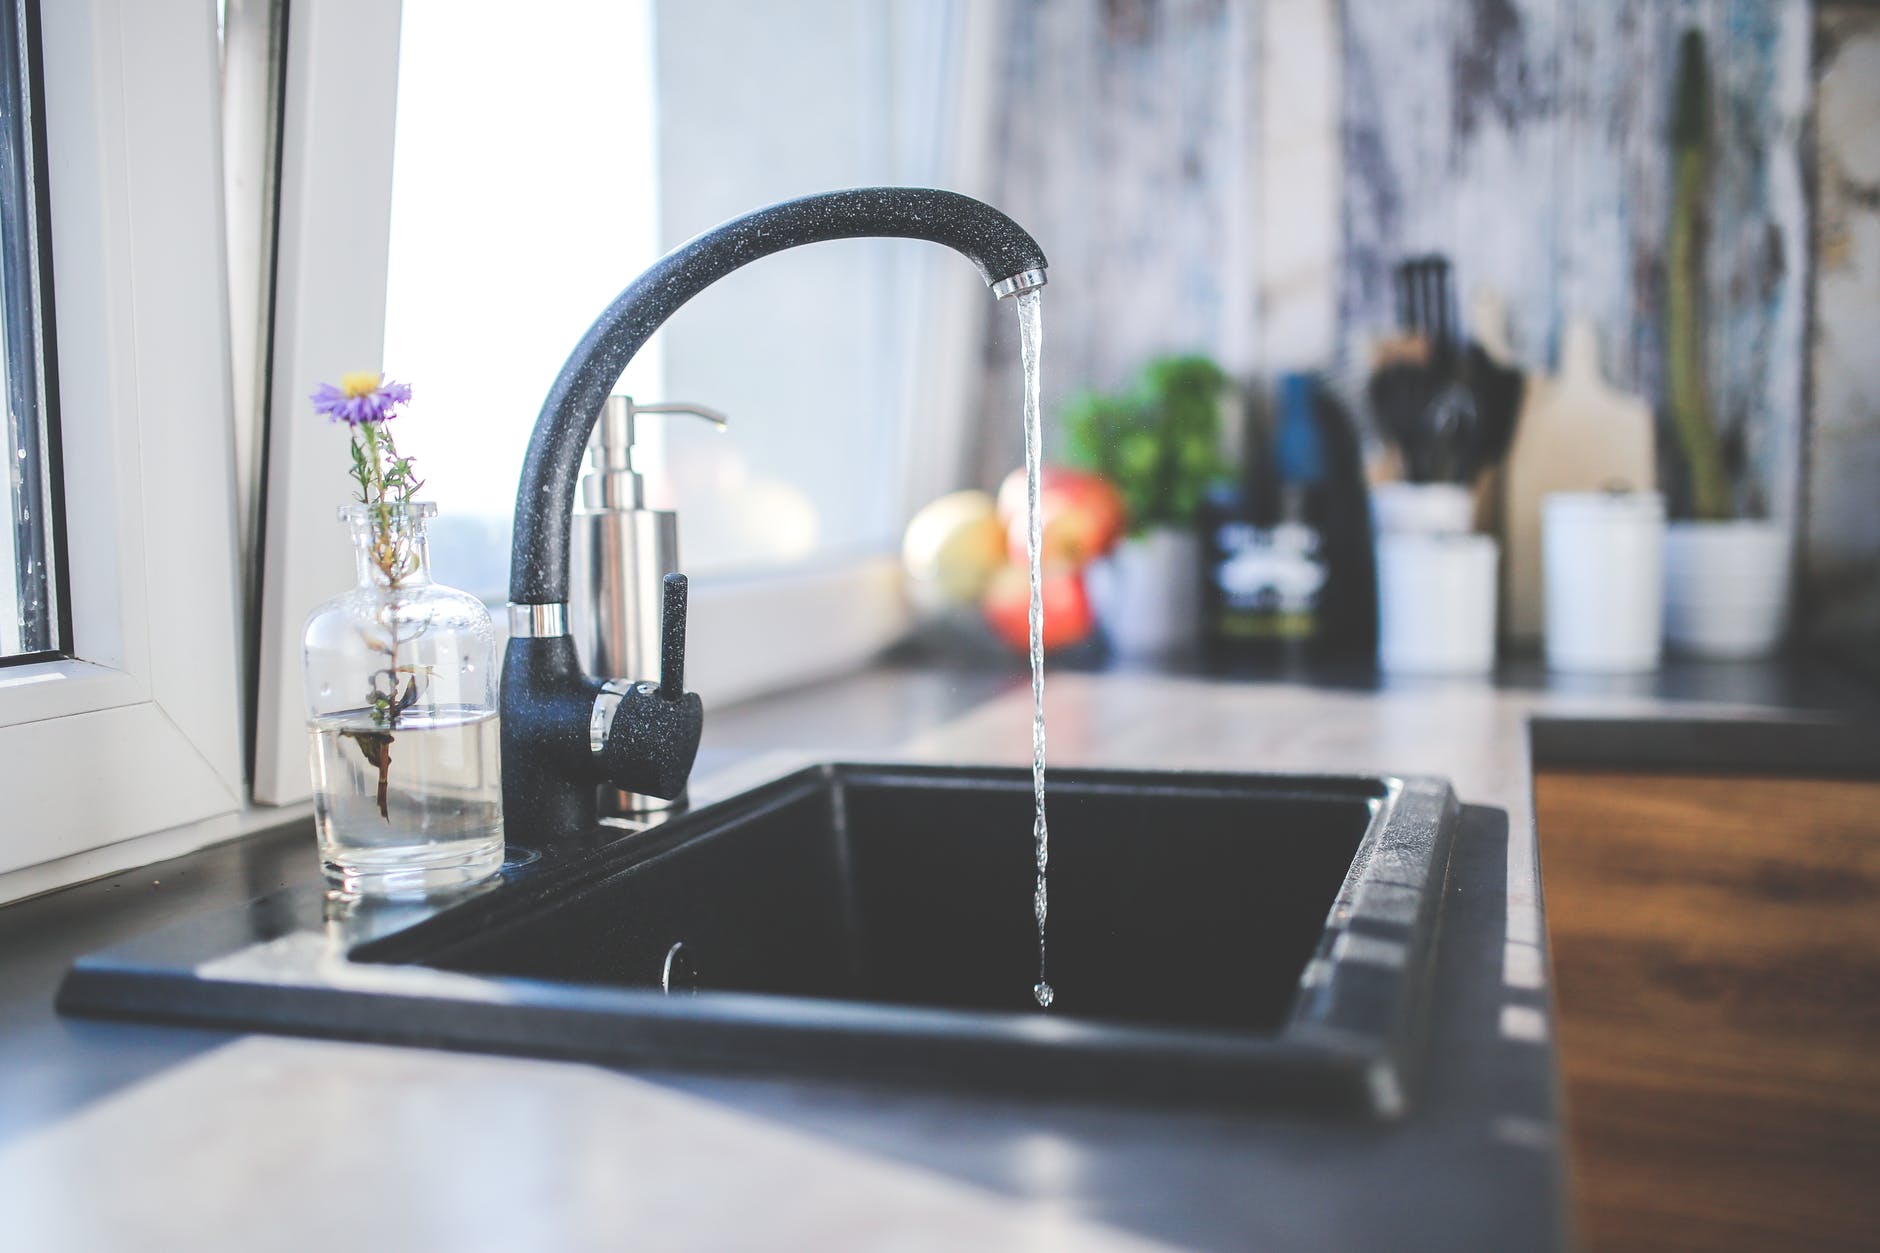 water flows from the tap to sink - weekend home improvement projects